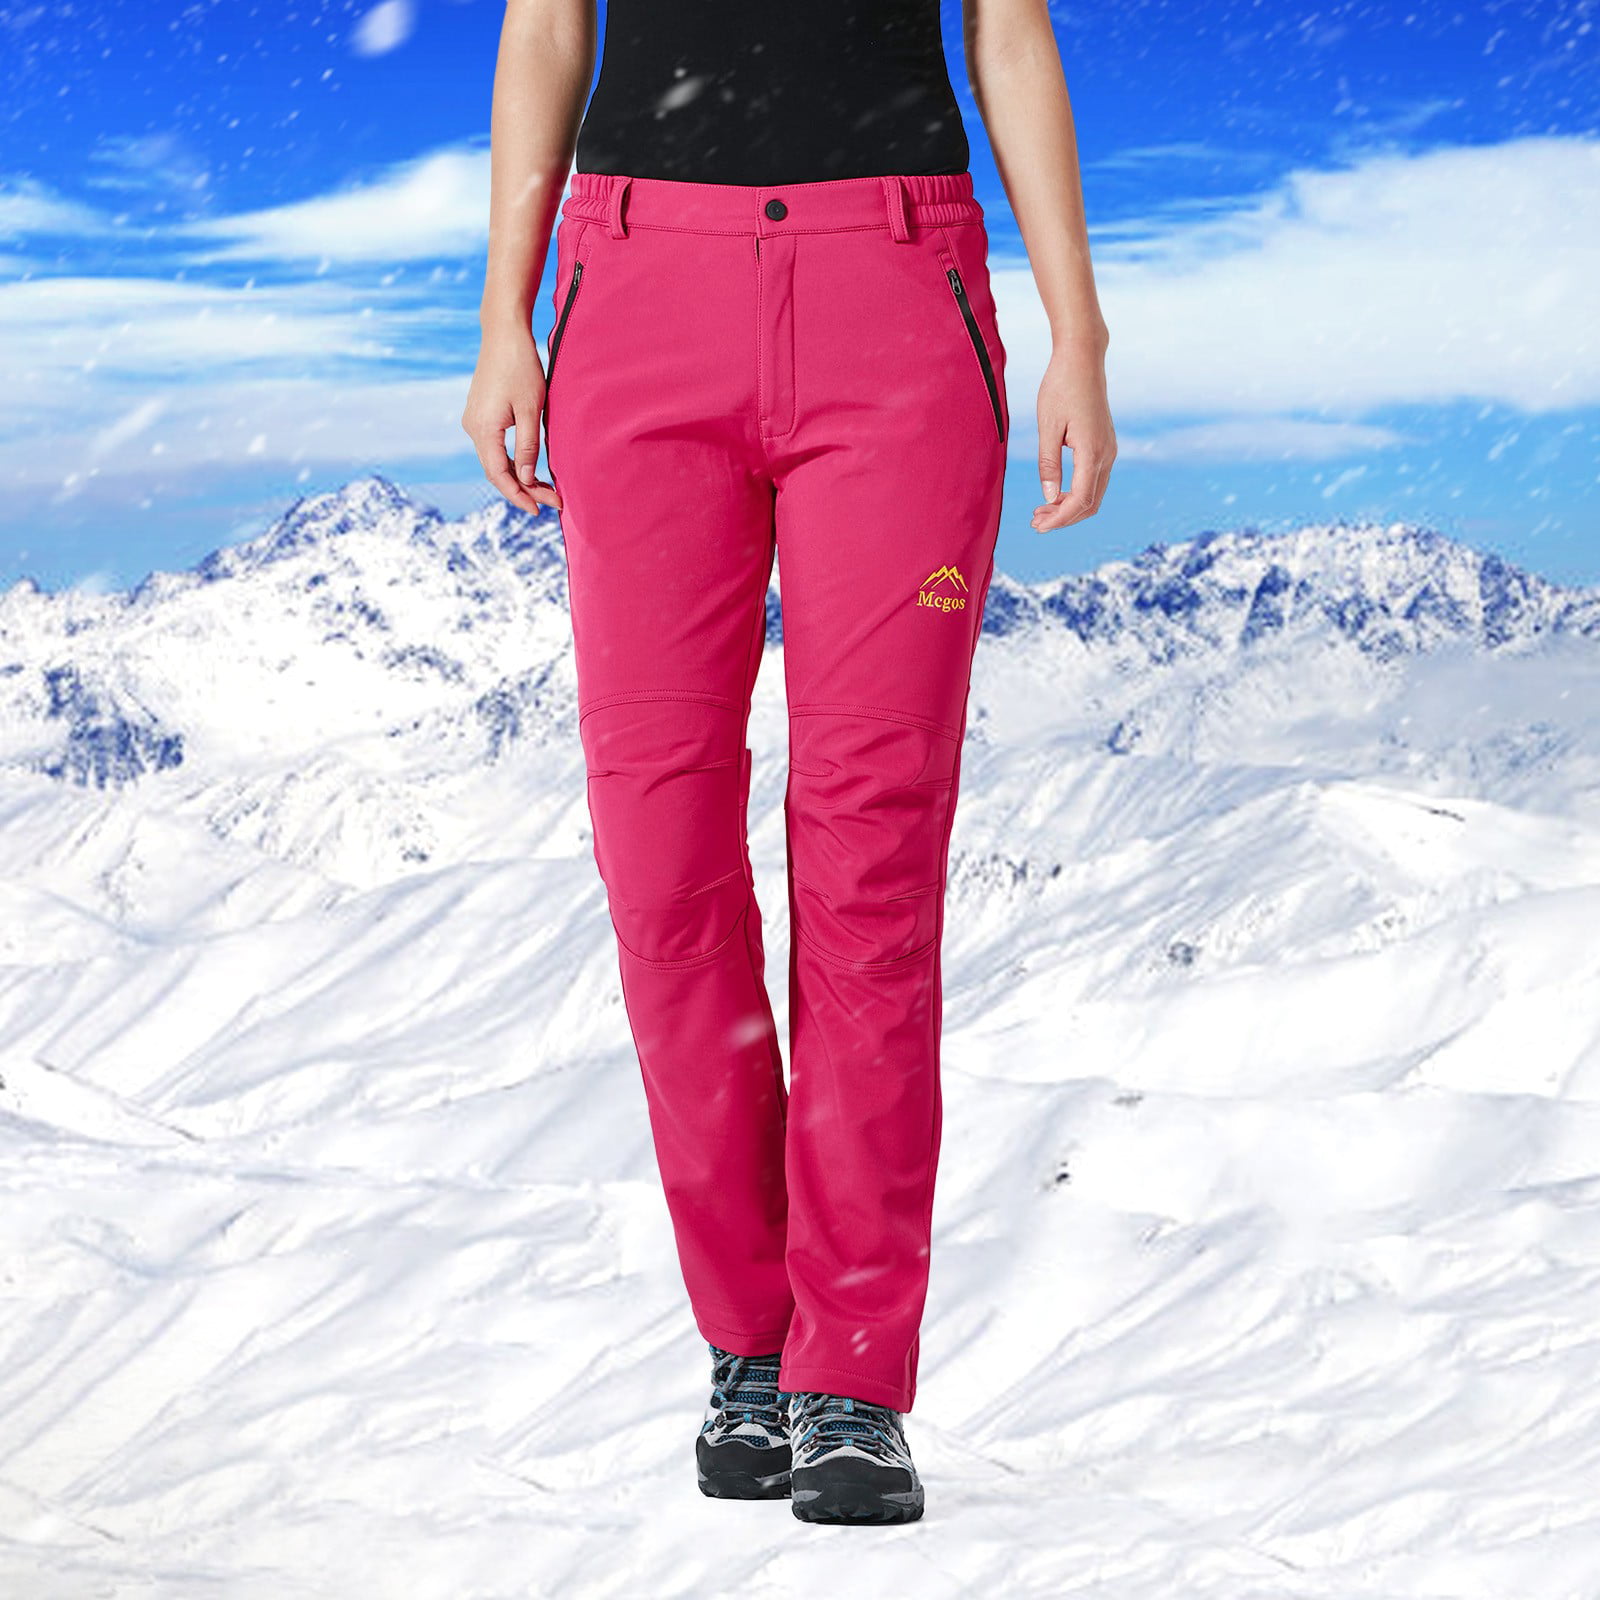 Thick Thermal Women Windproof Winter Snow Ski Pants Trousers Fleece Lined US 